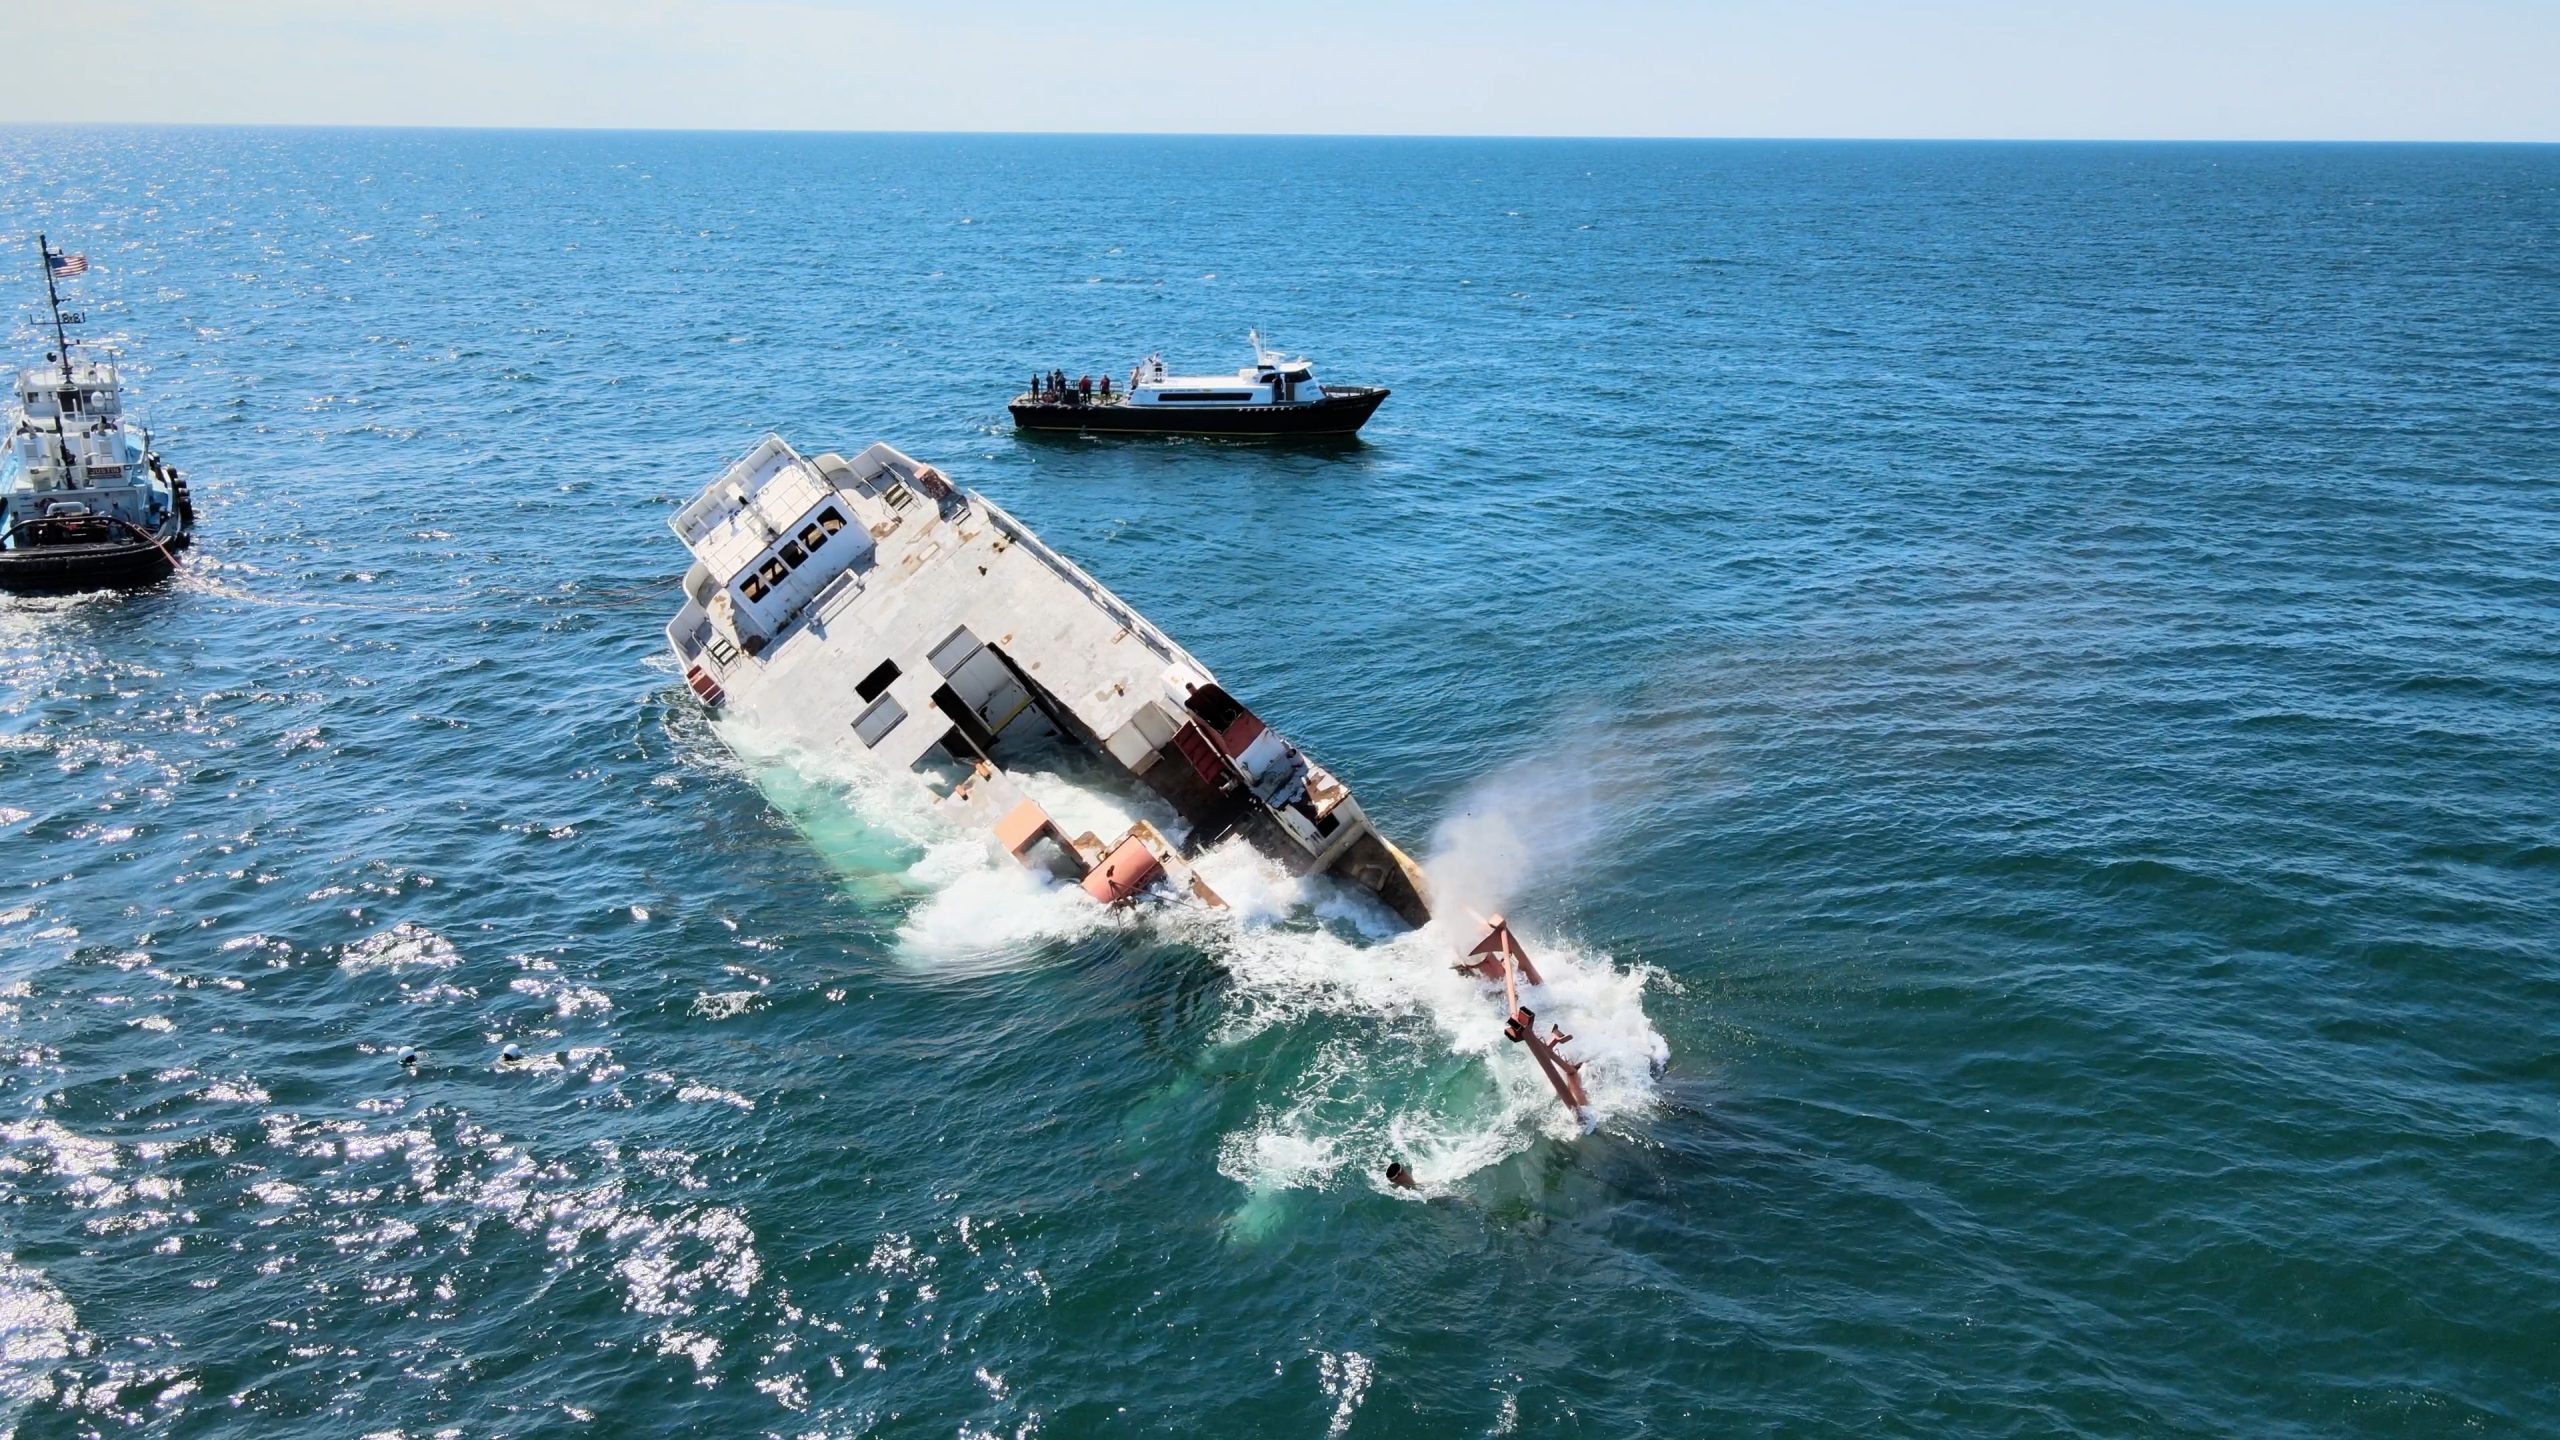 VIDEO: 180-Ft. Floating Casino Sunk in Atlantic for Artificial Reef